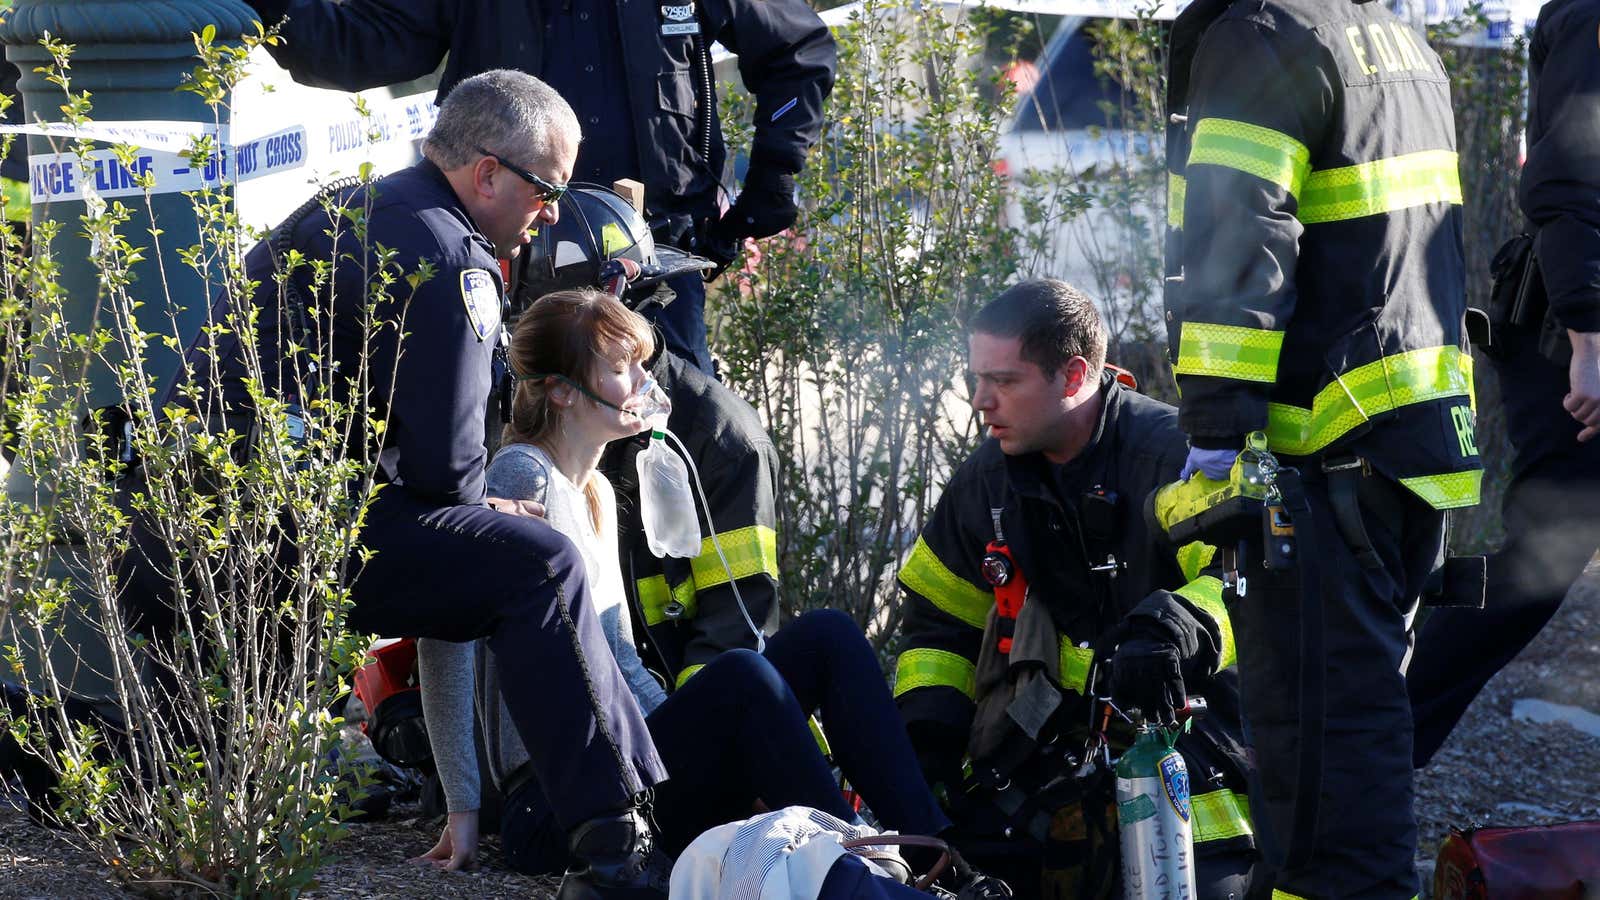 An injured woman is aided at the scene in lower Manhattan.